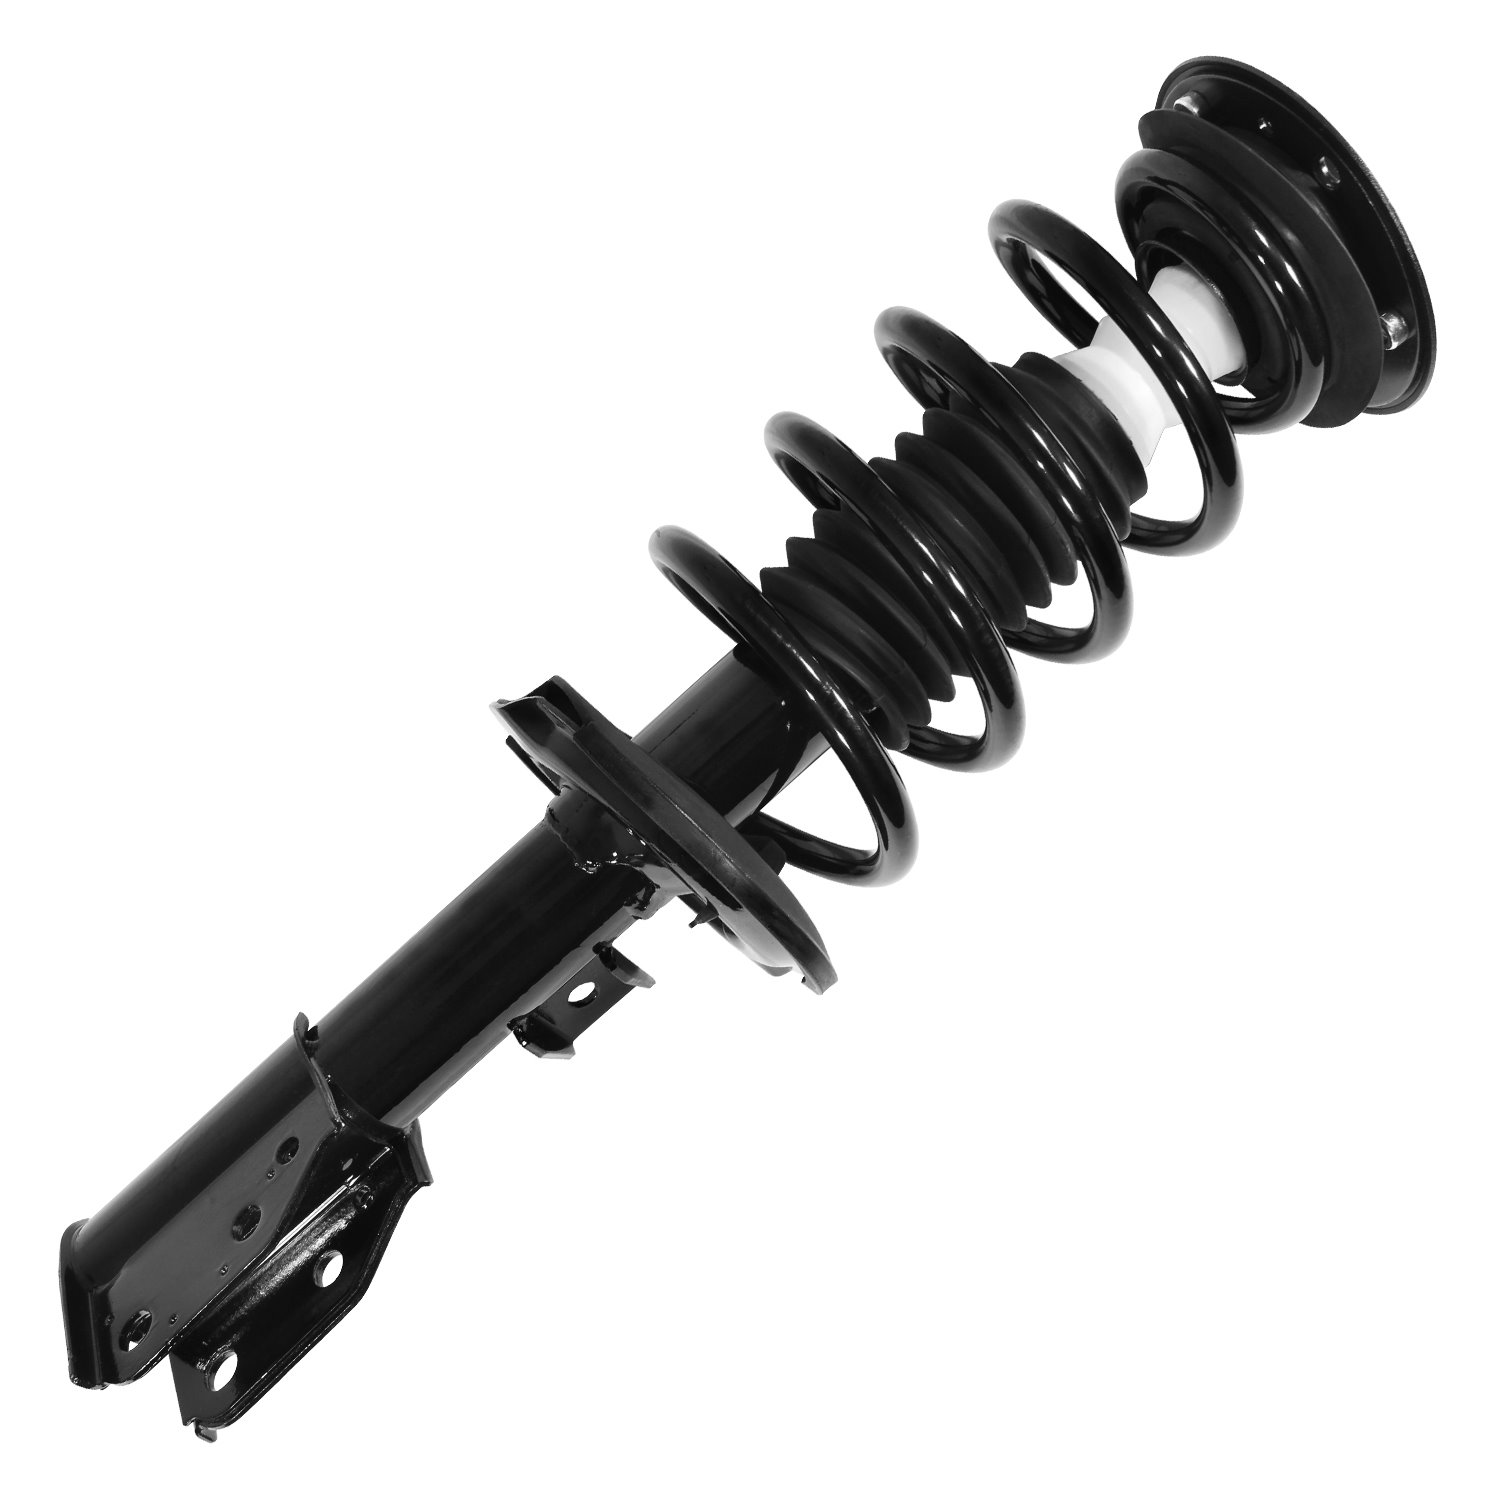 11873 Suspension Strut & Coil Spring Assembly Fits Select Chevy Equinox, Pontiac Torrent, Saturn Vue